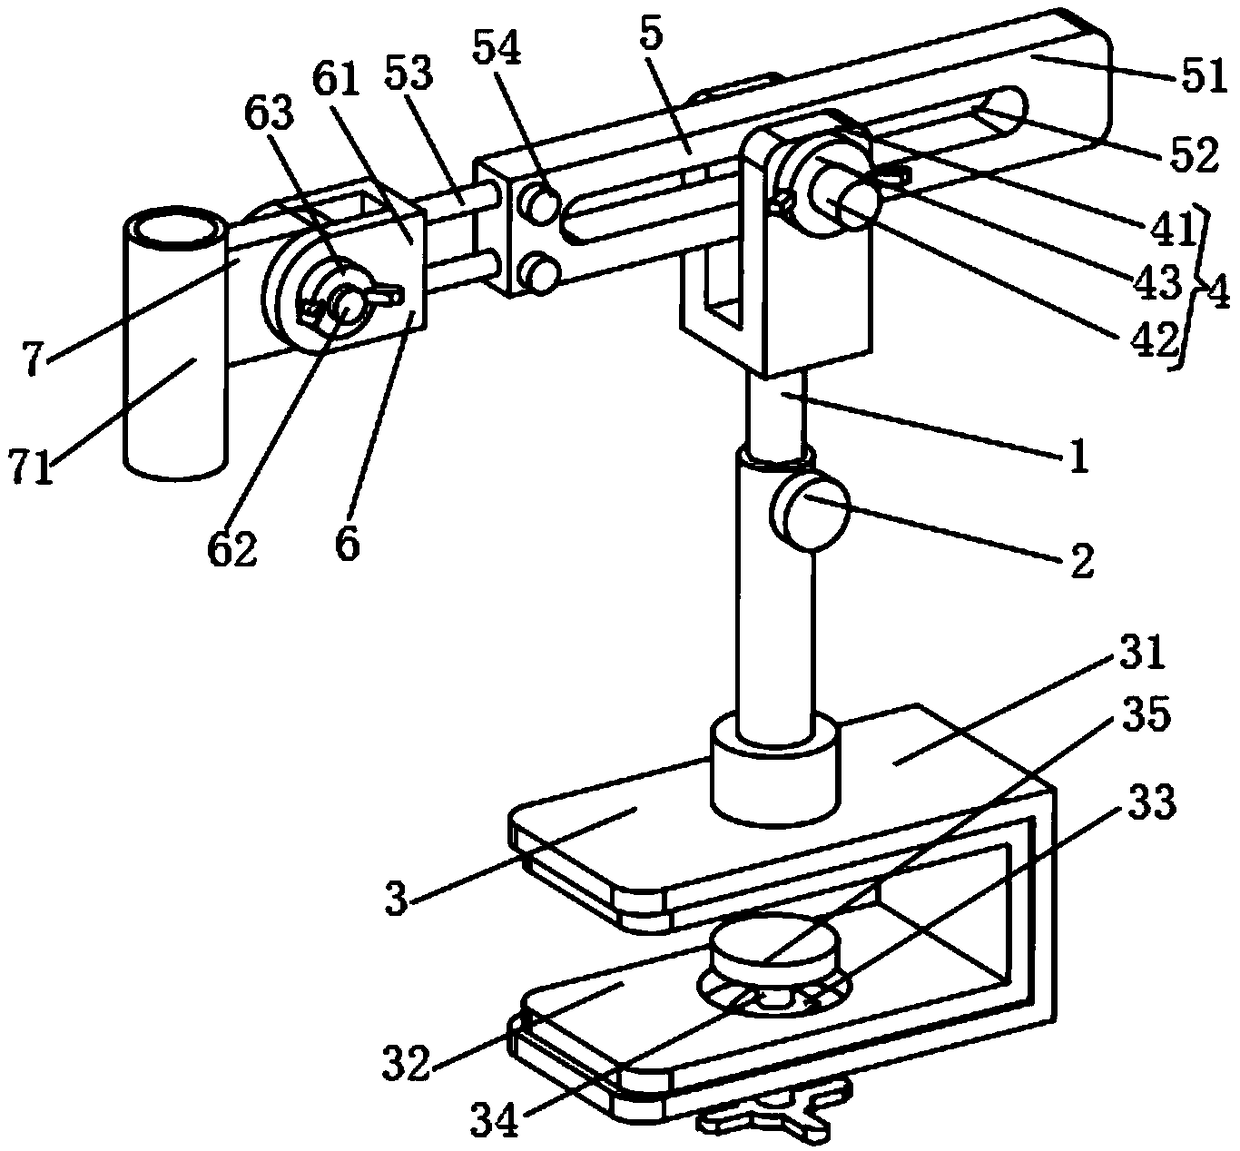 Positioning device for puncture guiding in CT image puncture